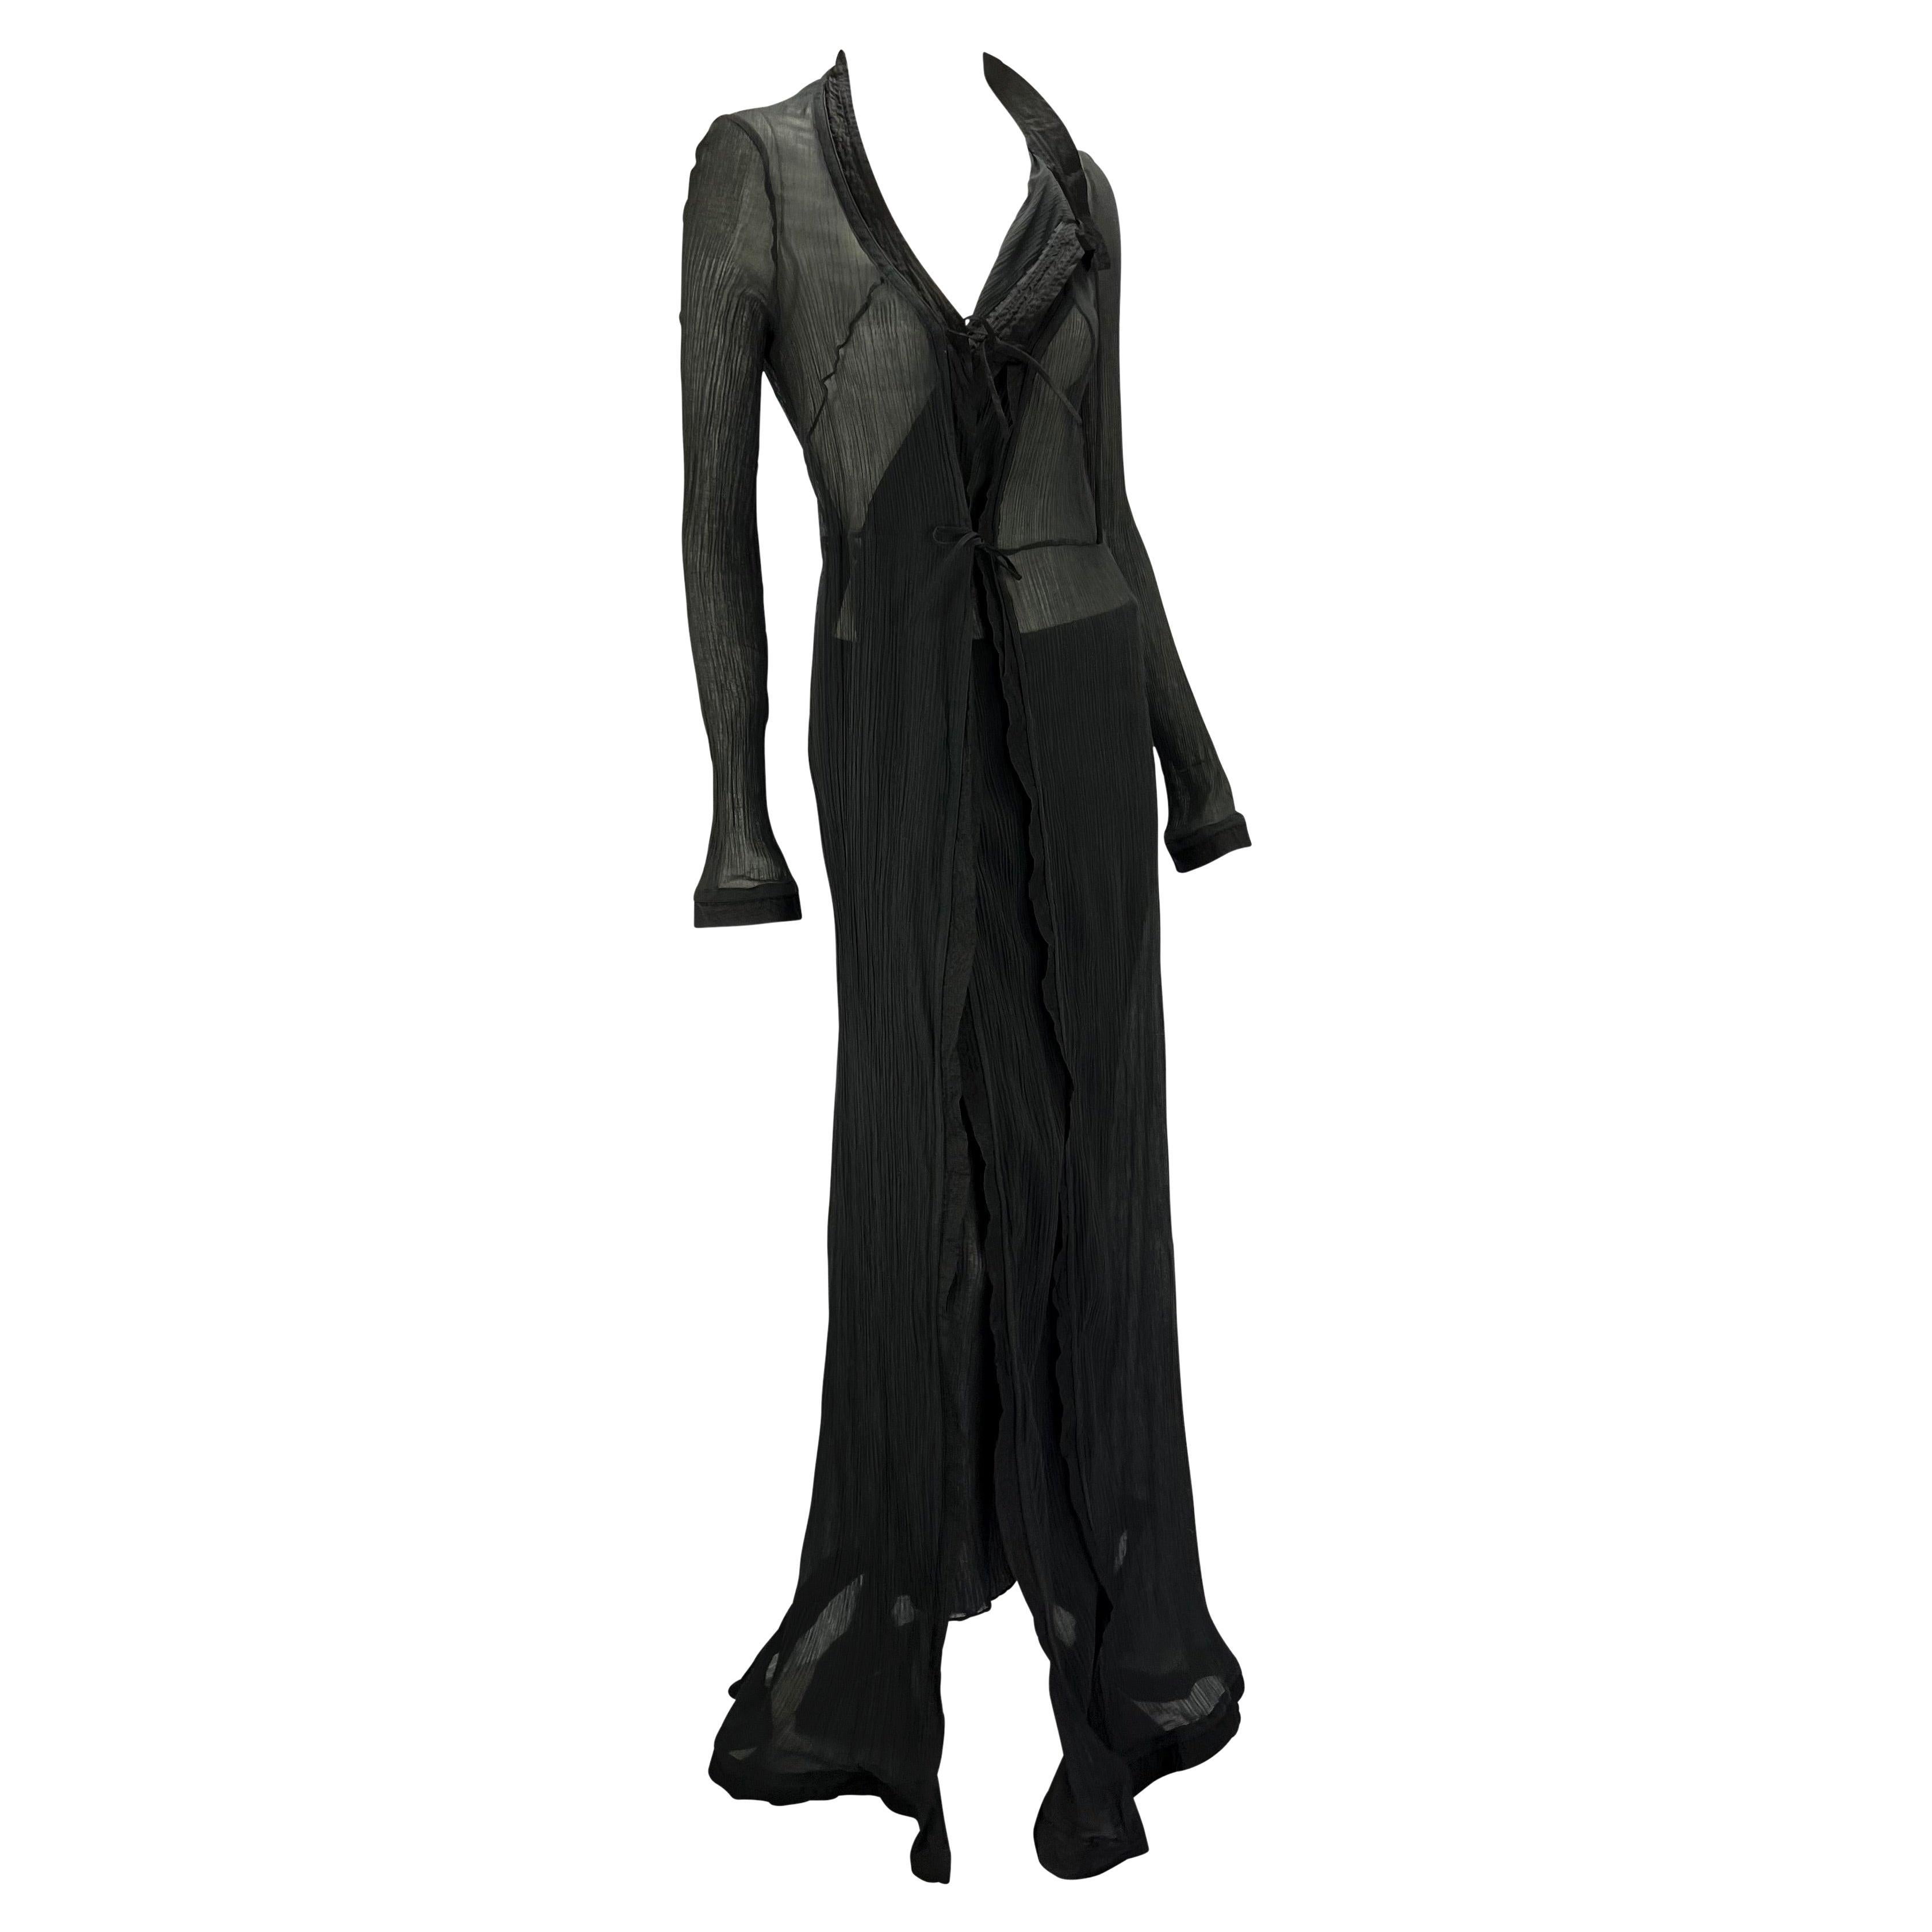 S/S 2002 Gucci by Tom Ford Runway Black Sheer Cotton Duster Dress Set For Sale 2